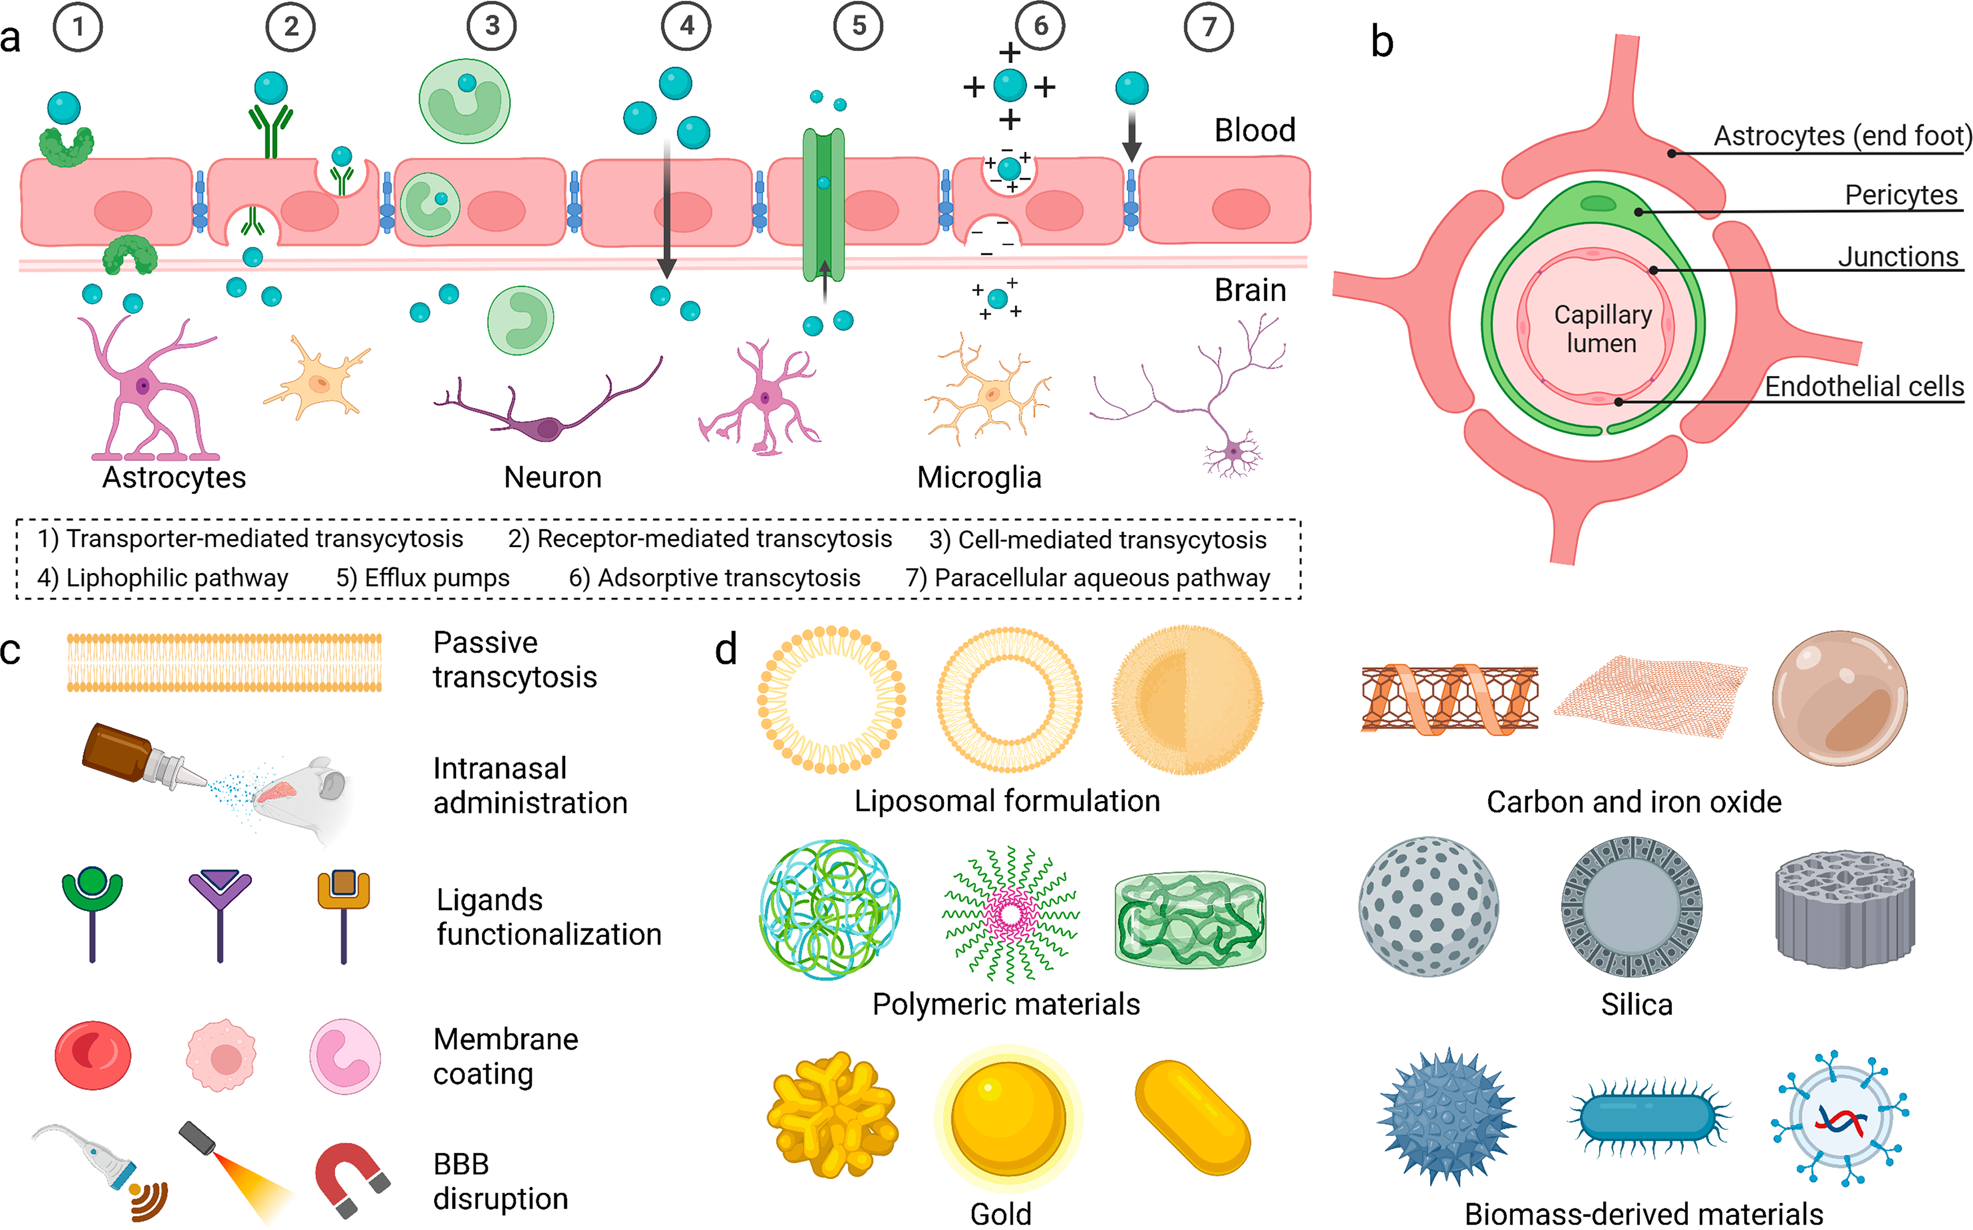 Bioinspired Theranostic Coordination Polymer Nanoparticles for Intranasal  Dopamine Replacement in Parkinson's Disease